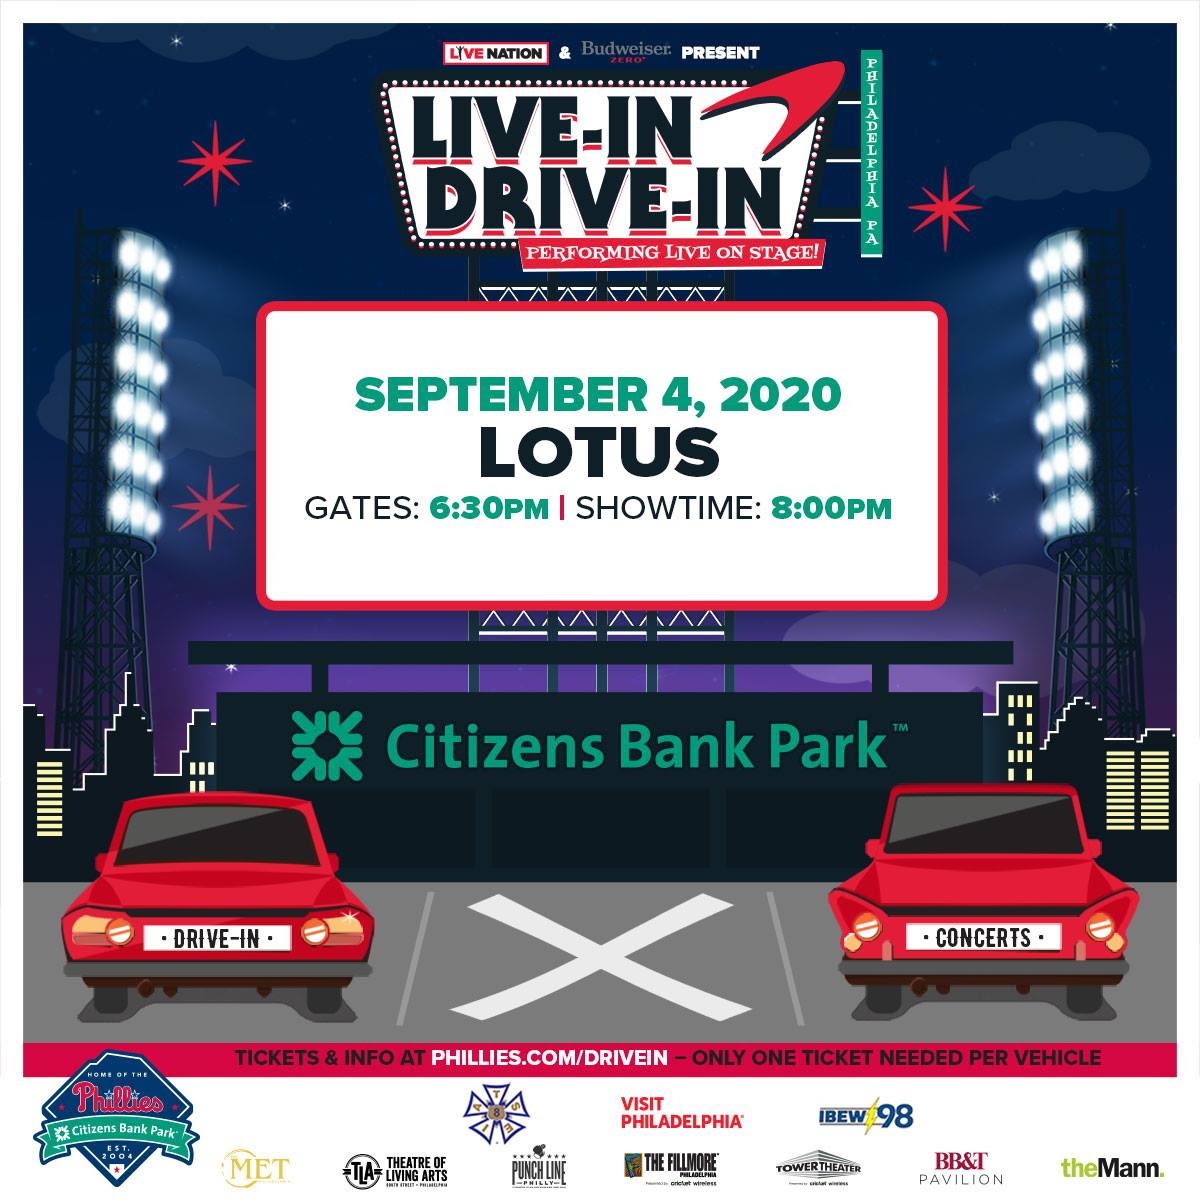 Performing Live On Stage September 4th at Citizens Bank Park in Philadelphia 